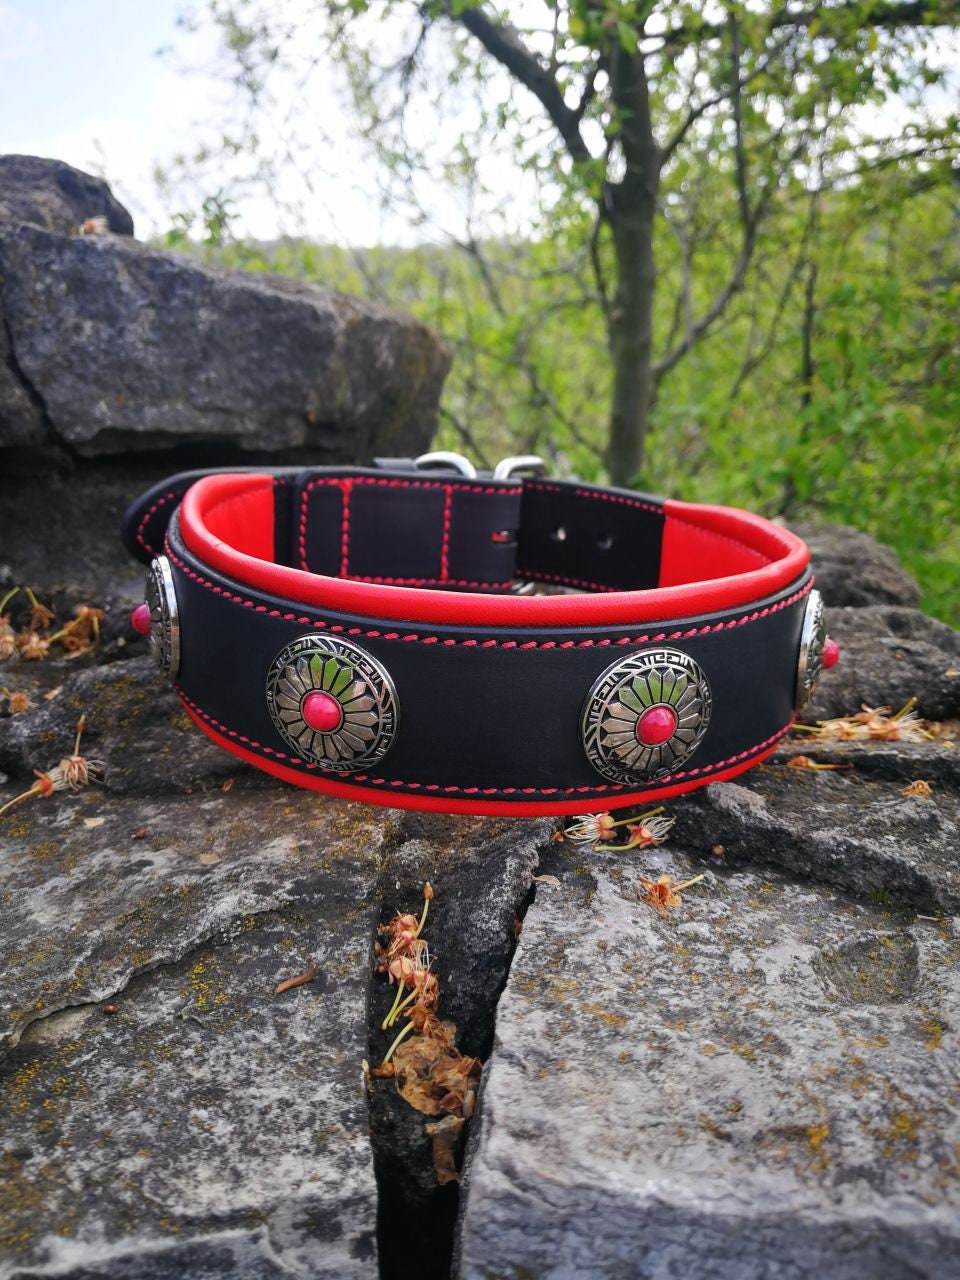 Red Leather Dog Collar with Conchos, Flower Design Dog Collar, Western Dog Collar, Padded Dog Collar with Conchos, Fancy Collar for Girl Dog